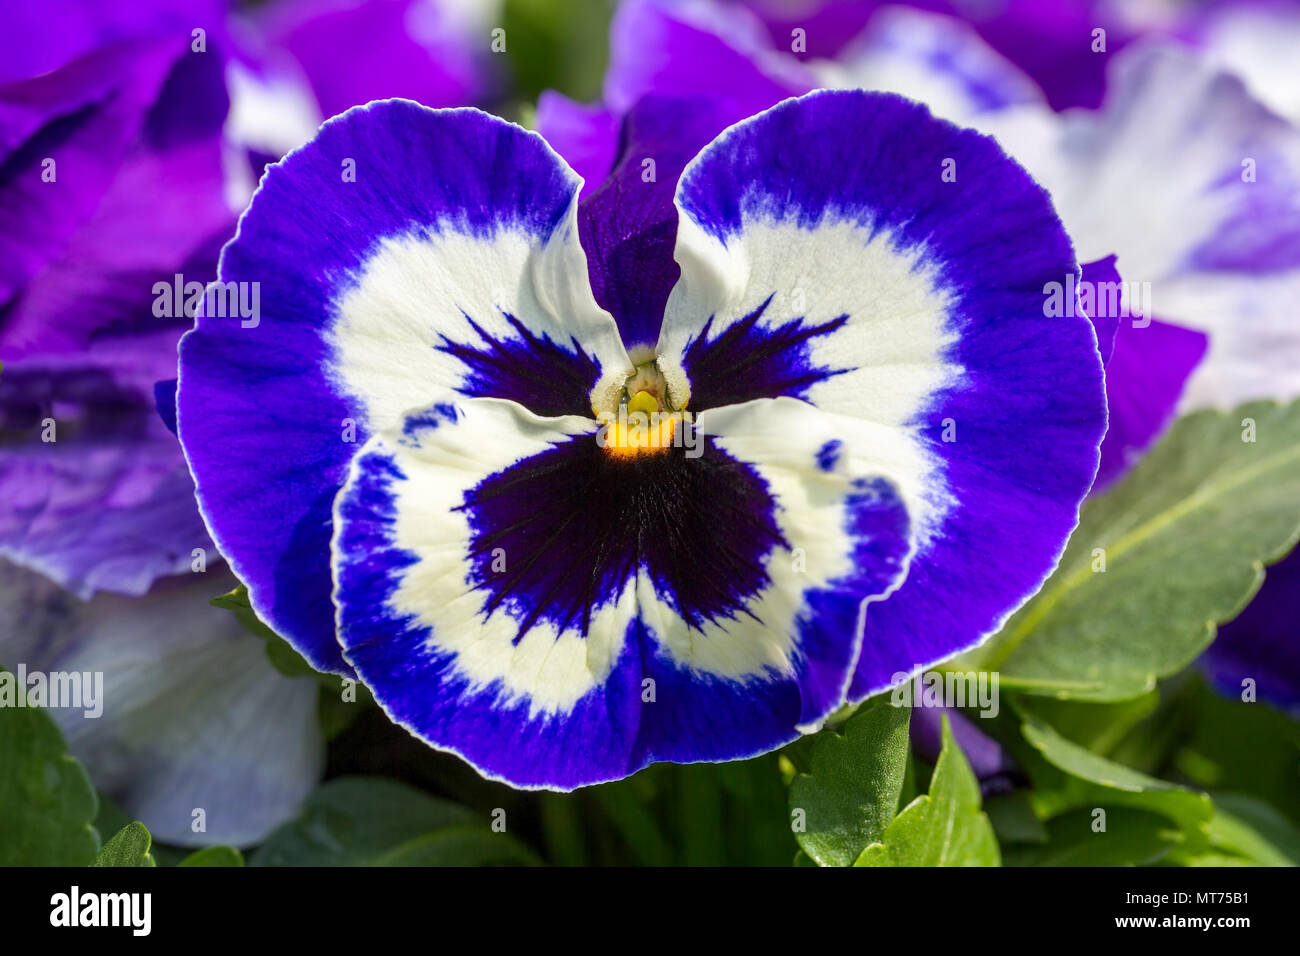 Close up of blue violet flower with details Stock Photo